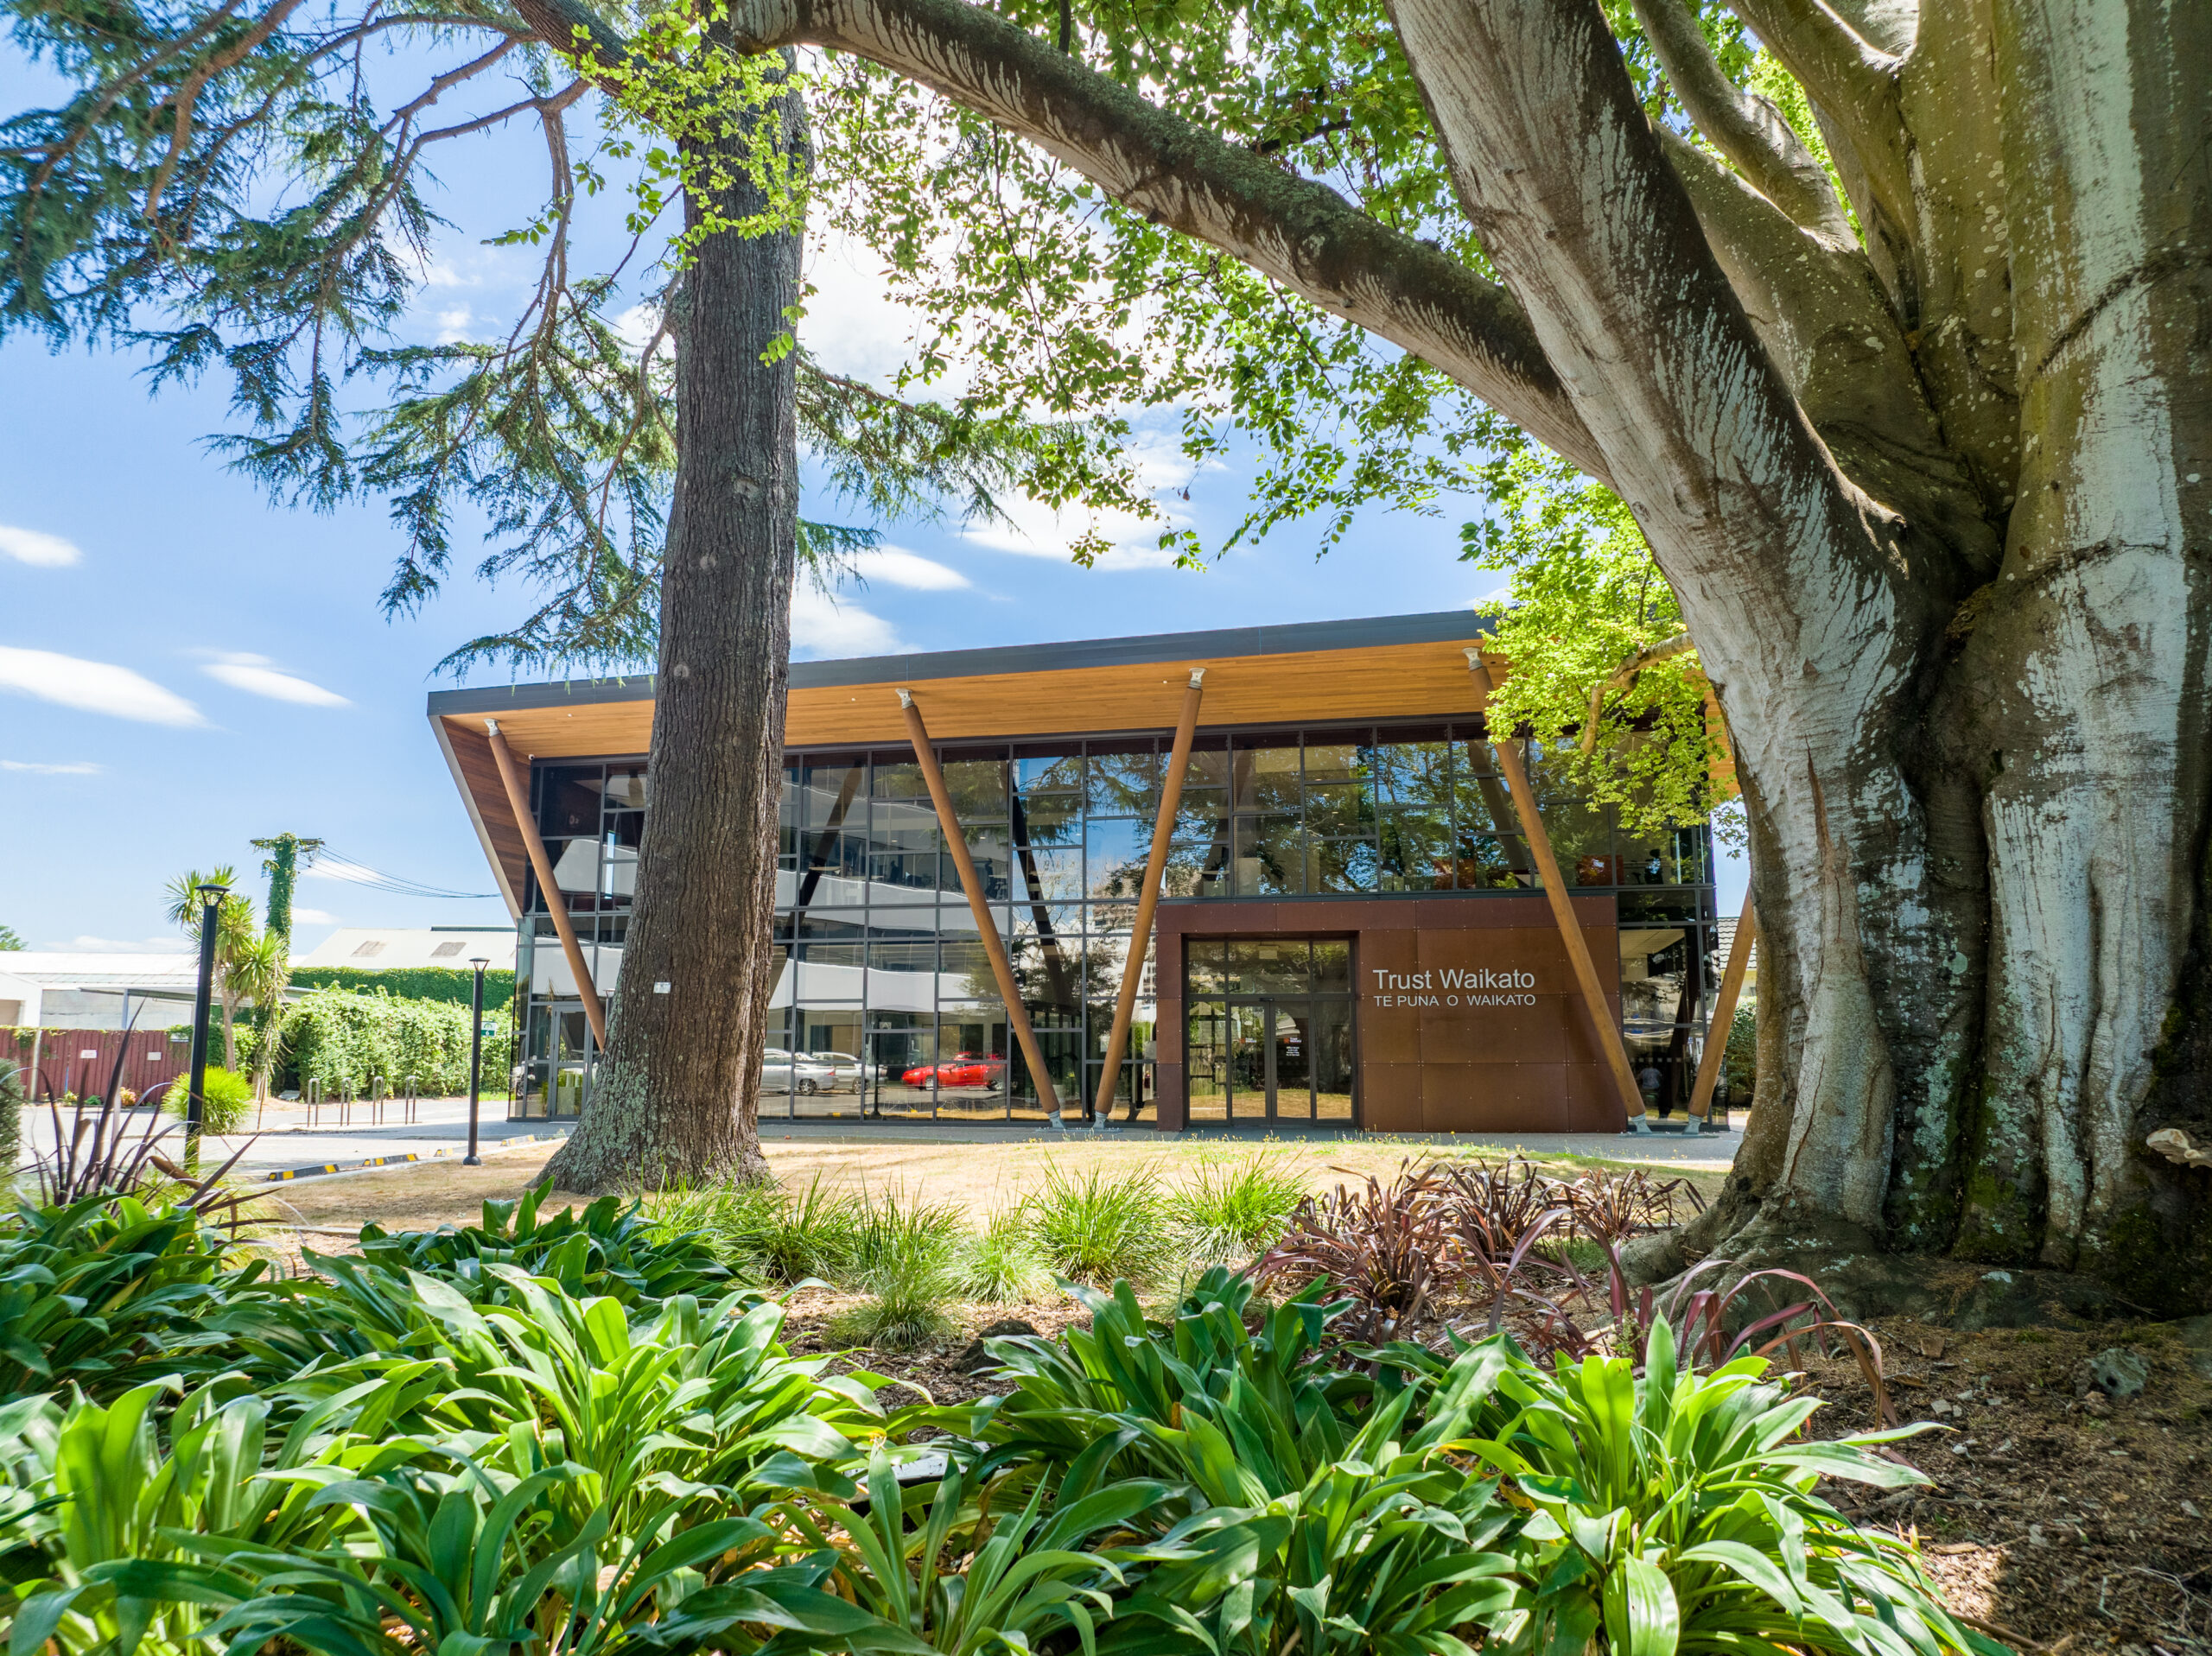 The Trust Waikato office and gardens